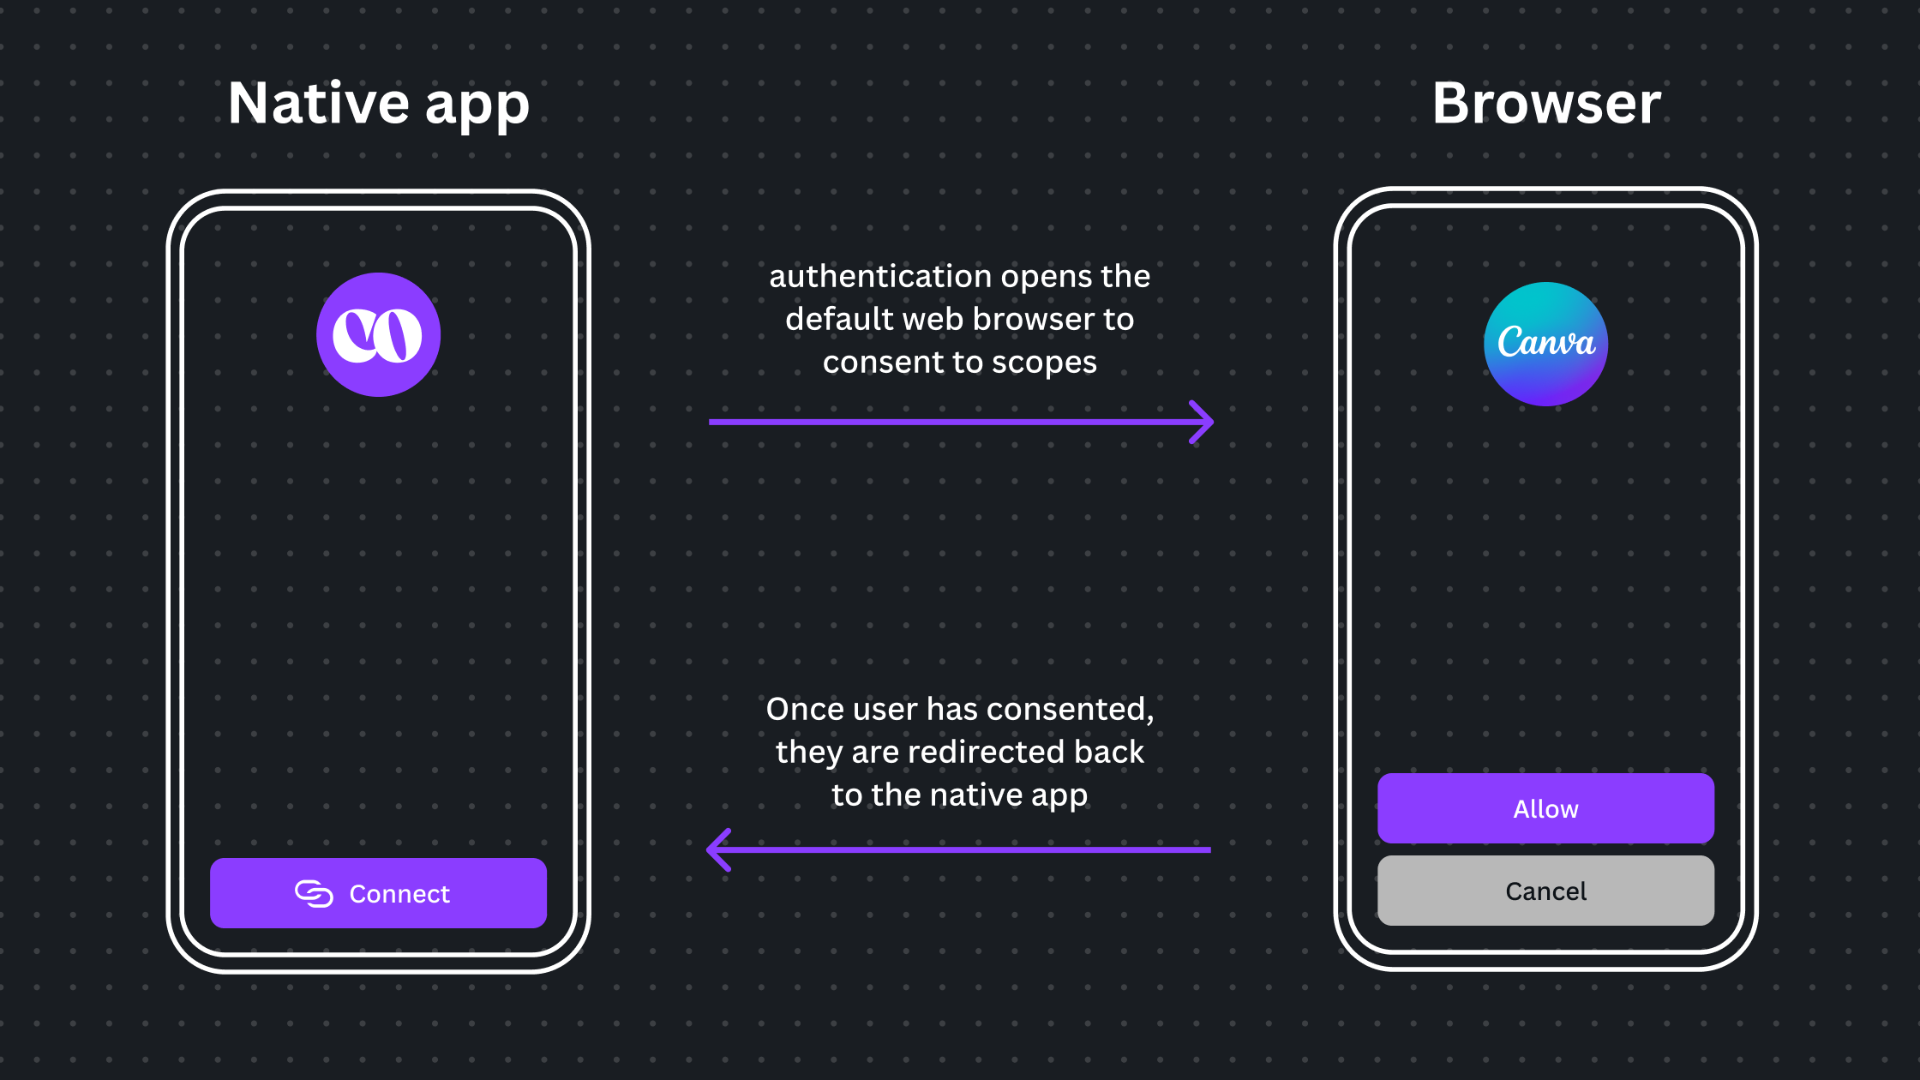 Browser-based authentication flow